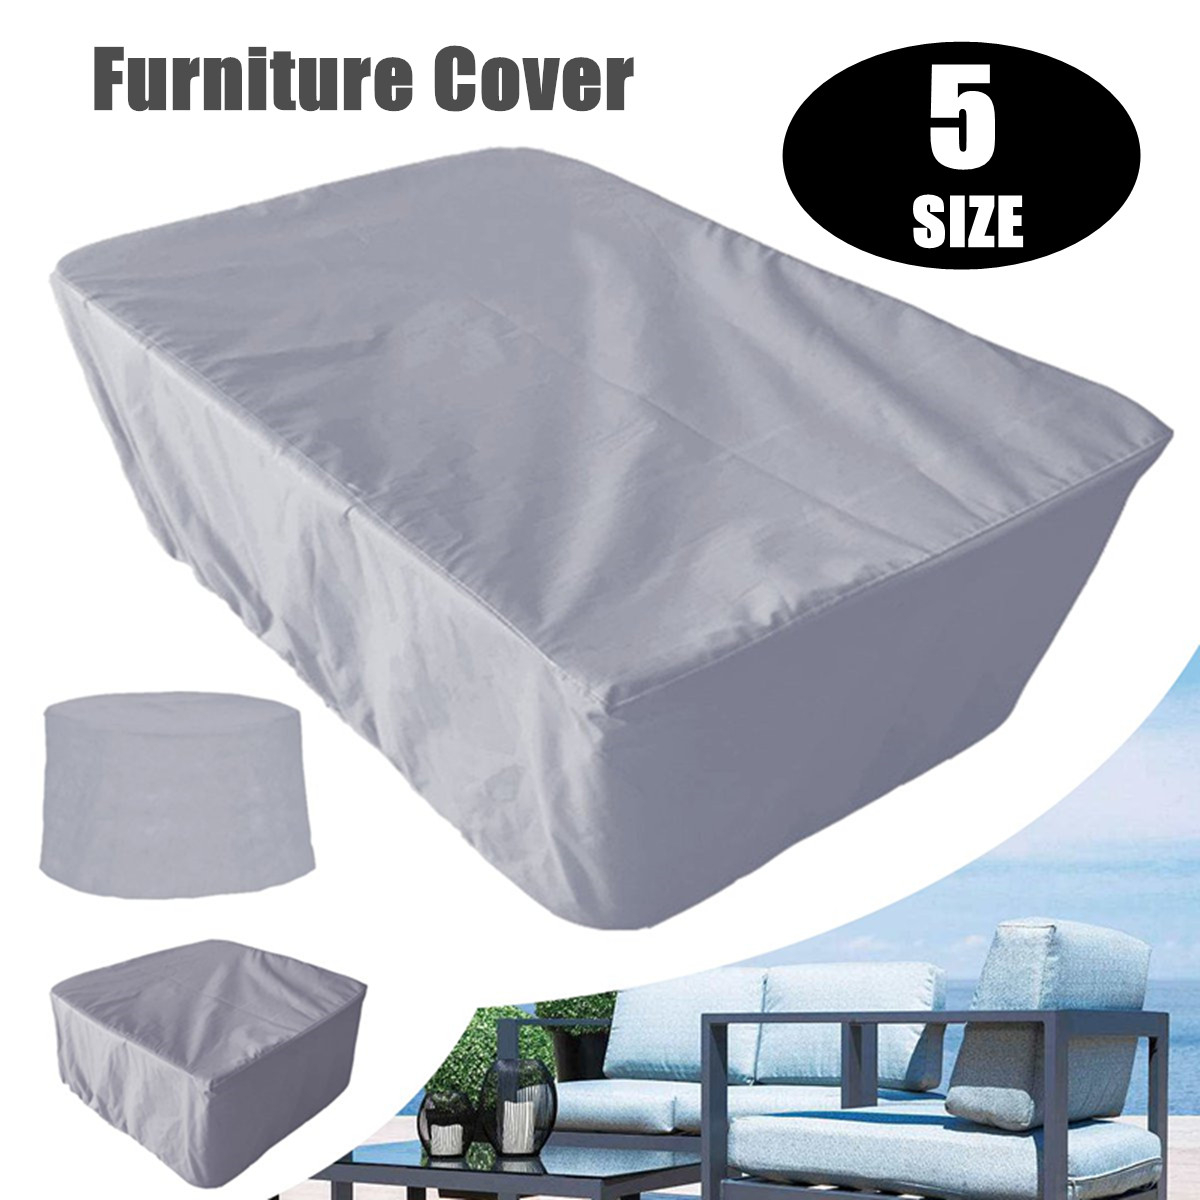 Details About 5 Size Gray Waterproof Garden Patio Furniture Cover Outdoor Shelter U inside proportions 1200 X 1200